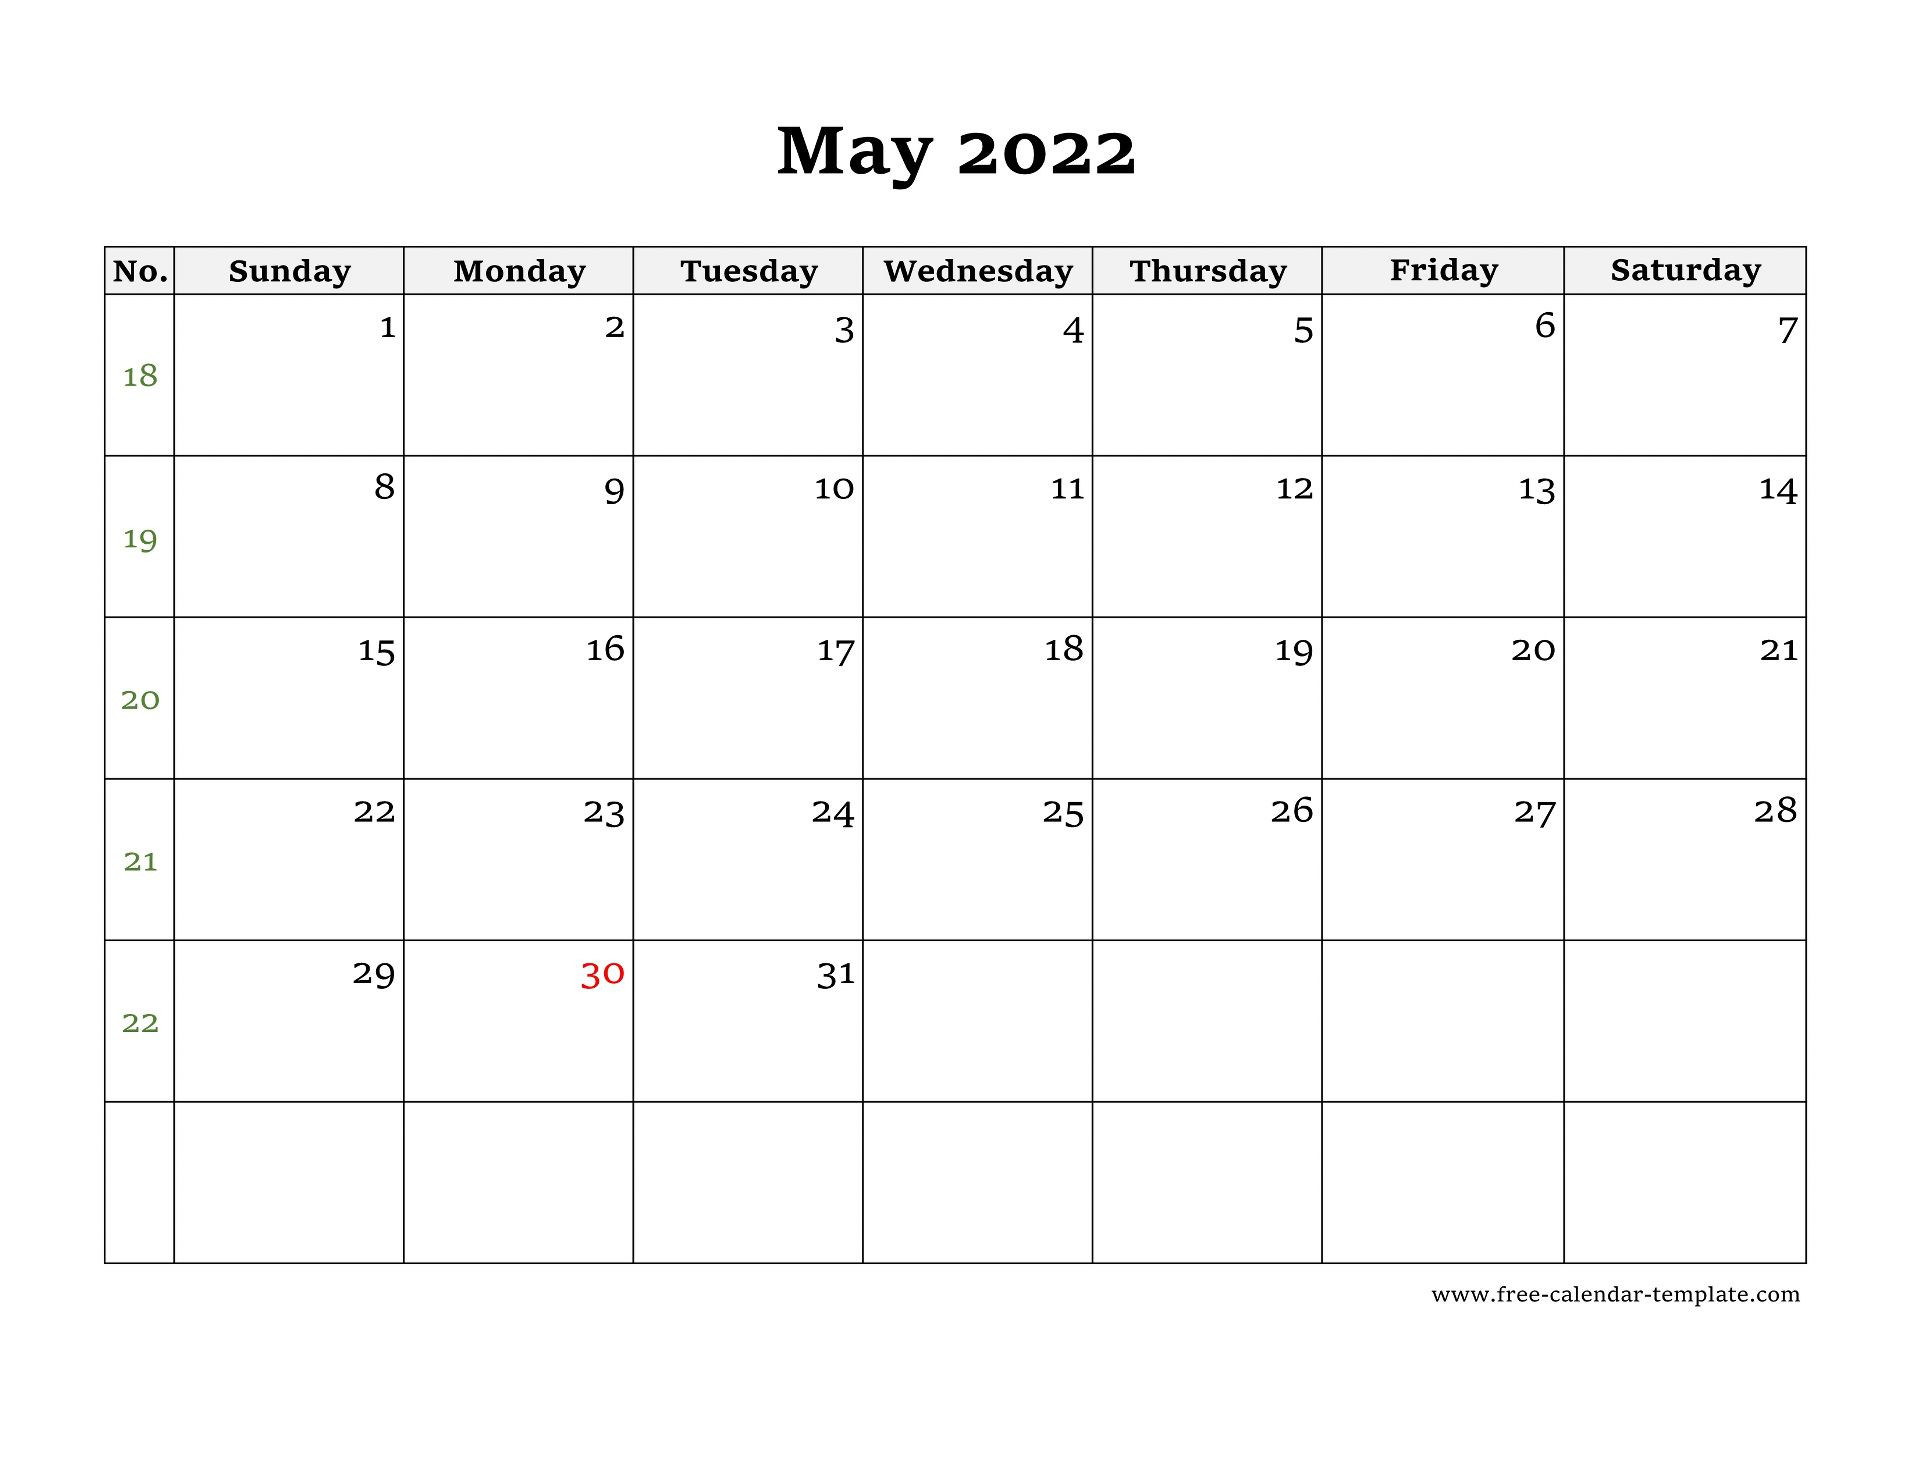 Simple May Calendar 2022 Large Box On Each Day For Notes  Calendar November 2022 To May 2022